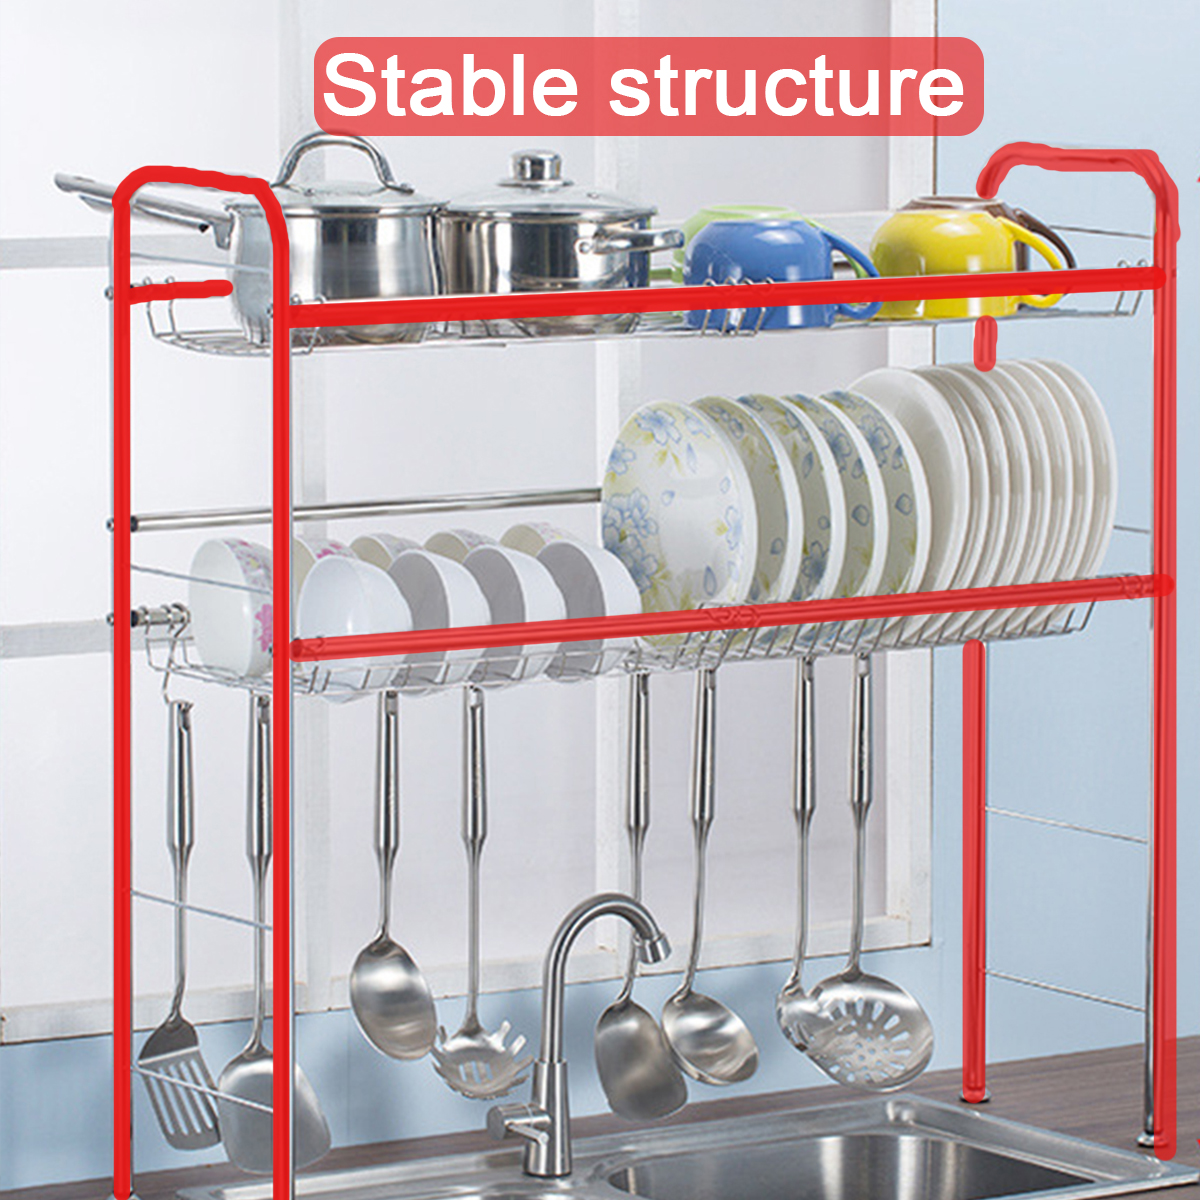 2-Tiers-Stainless-Steel-Dishes-Rack-Dual-Sink-Drain-Rack-Adjustable-Multi-use-Kitchen-Organizer-Rack-1661464-7